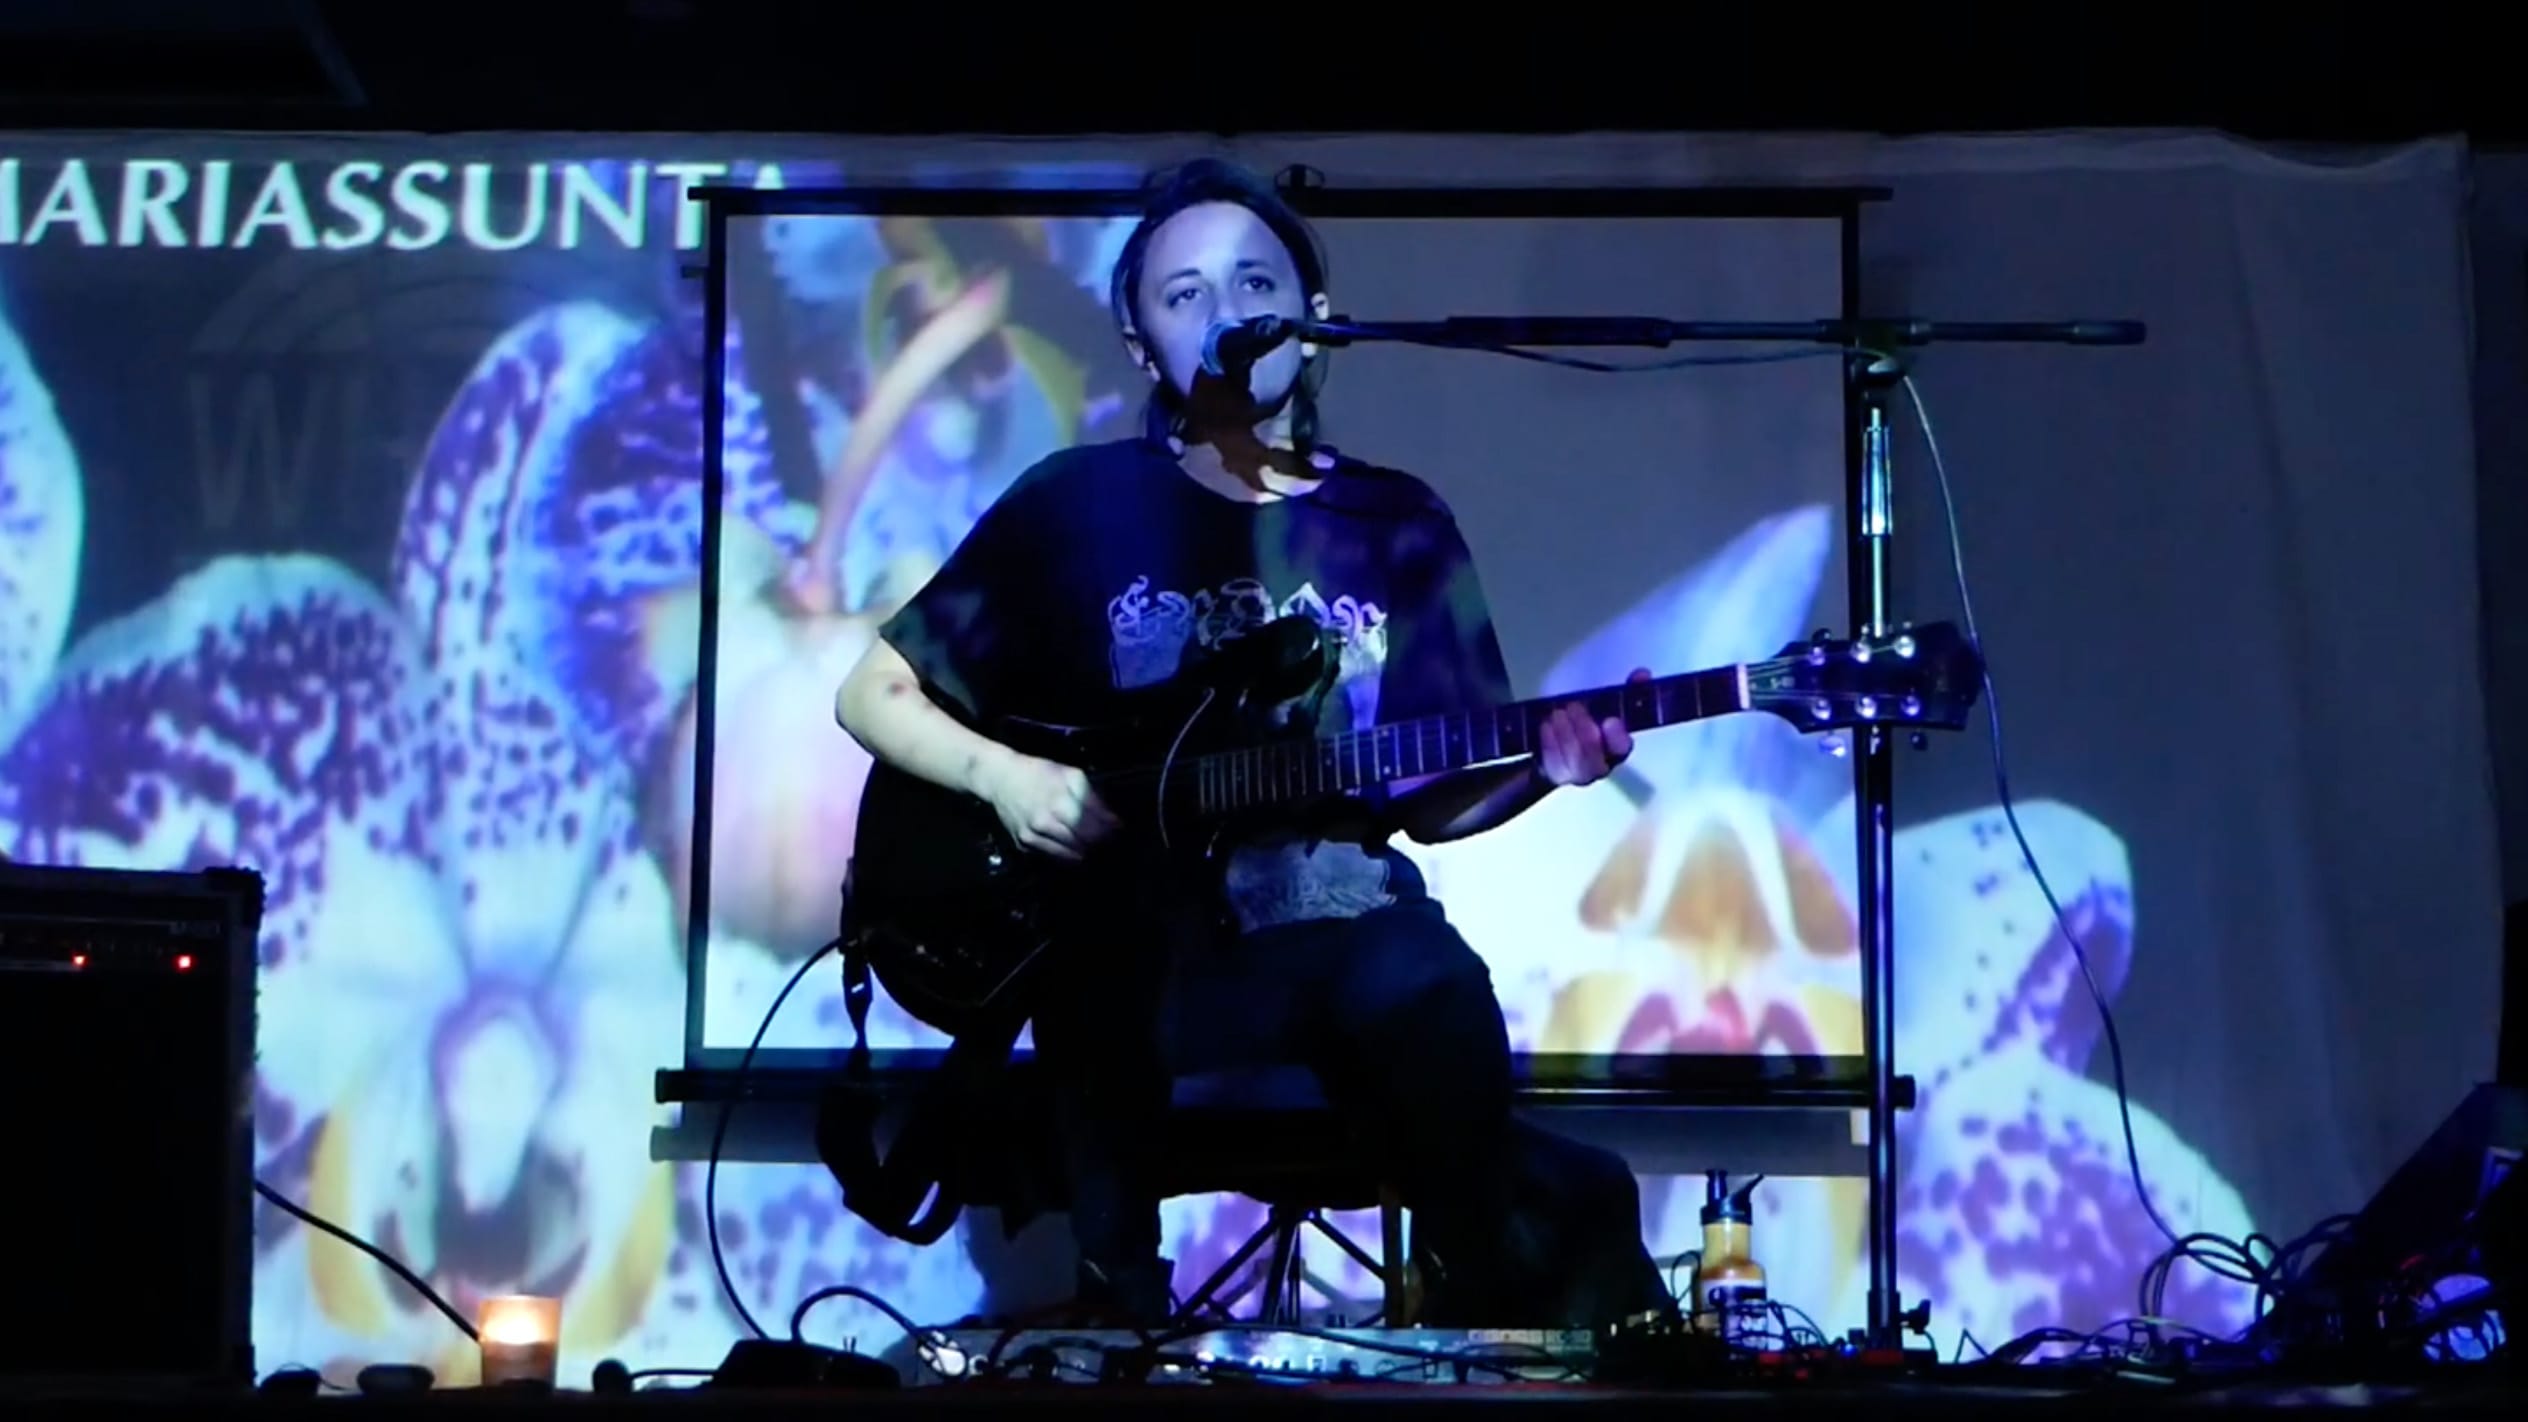 Mariassunta playing an electric guitar live, with a projected image of a purple flower flooding the stage